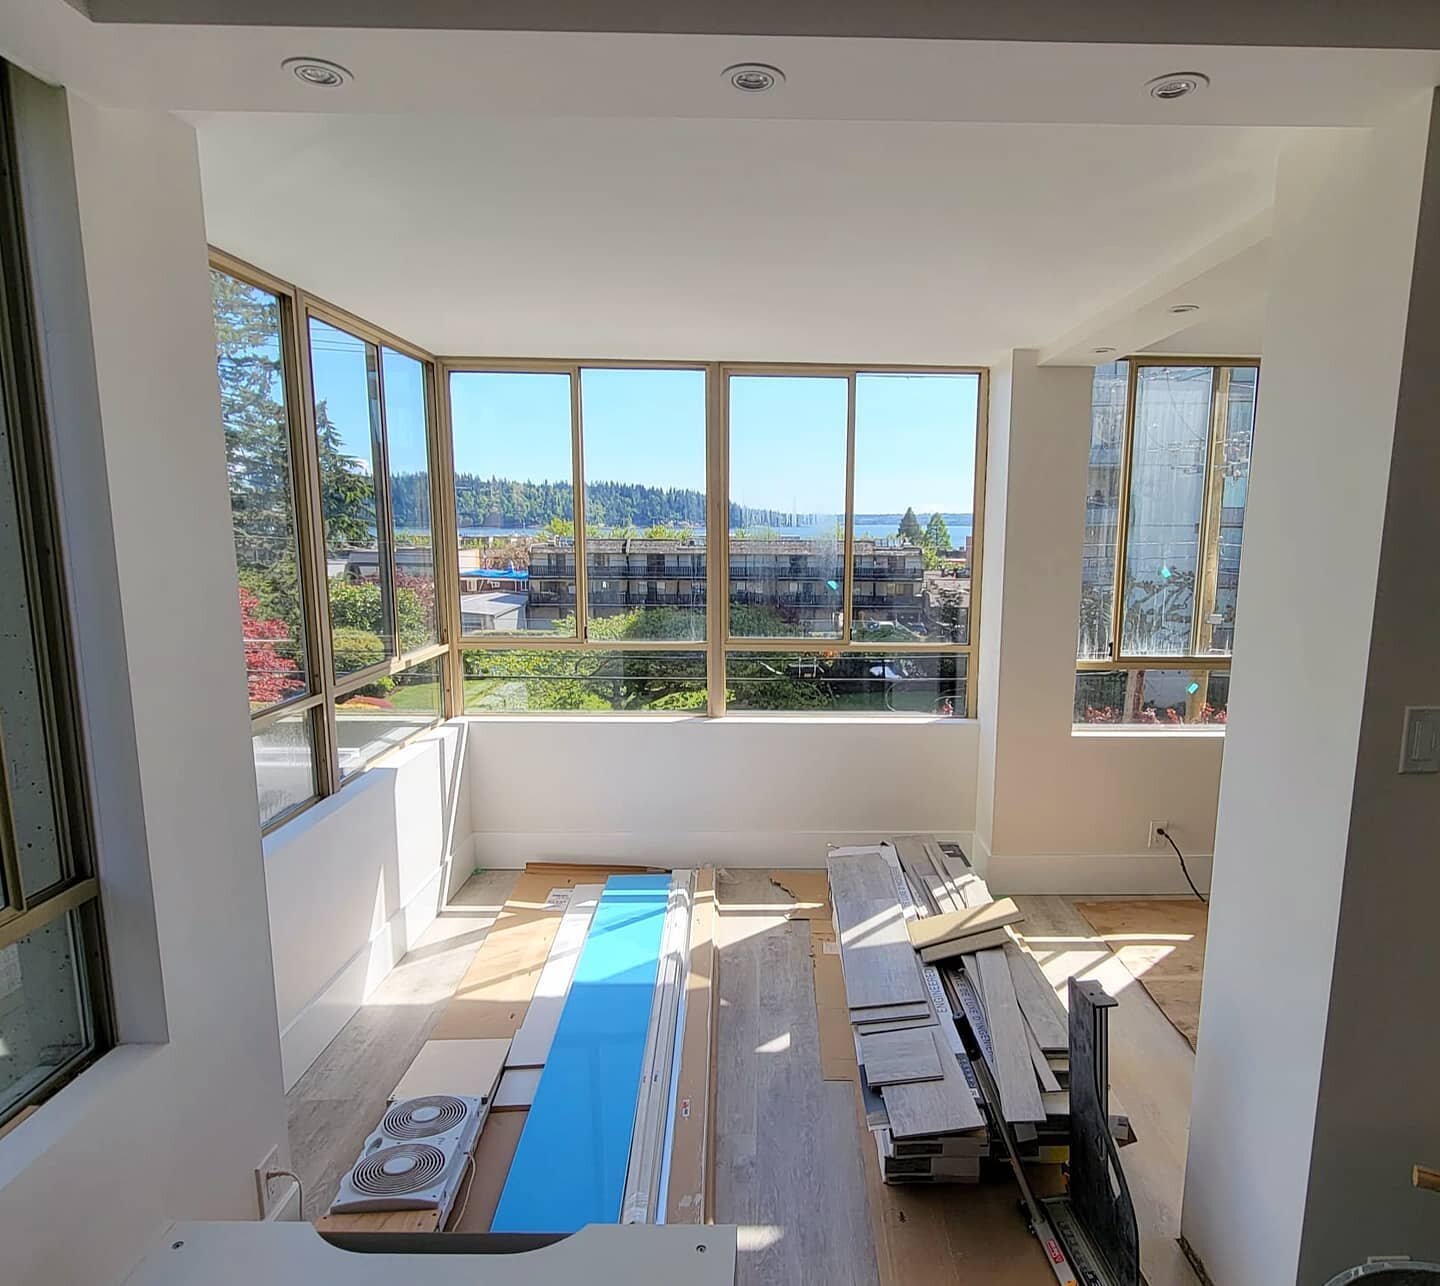 Imagine waking up and drinking your coffee with this view ☕☀️

Flooring has been installed and walls are painted in our clients' West Vancouver condo. We are getting closer to the big reveal - stay tuned!